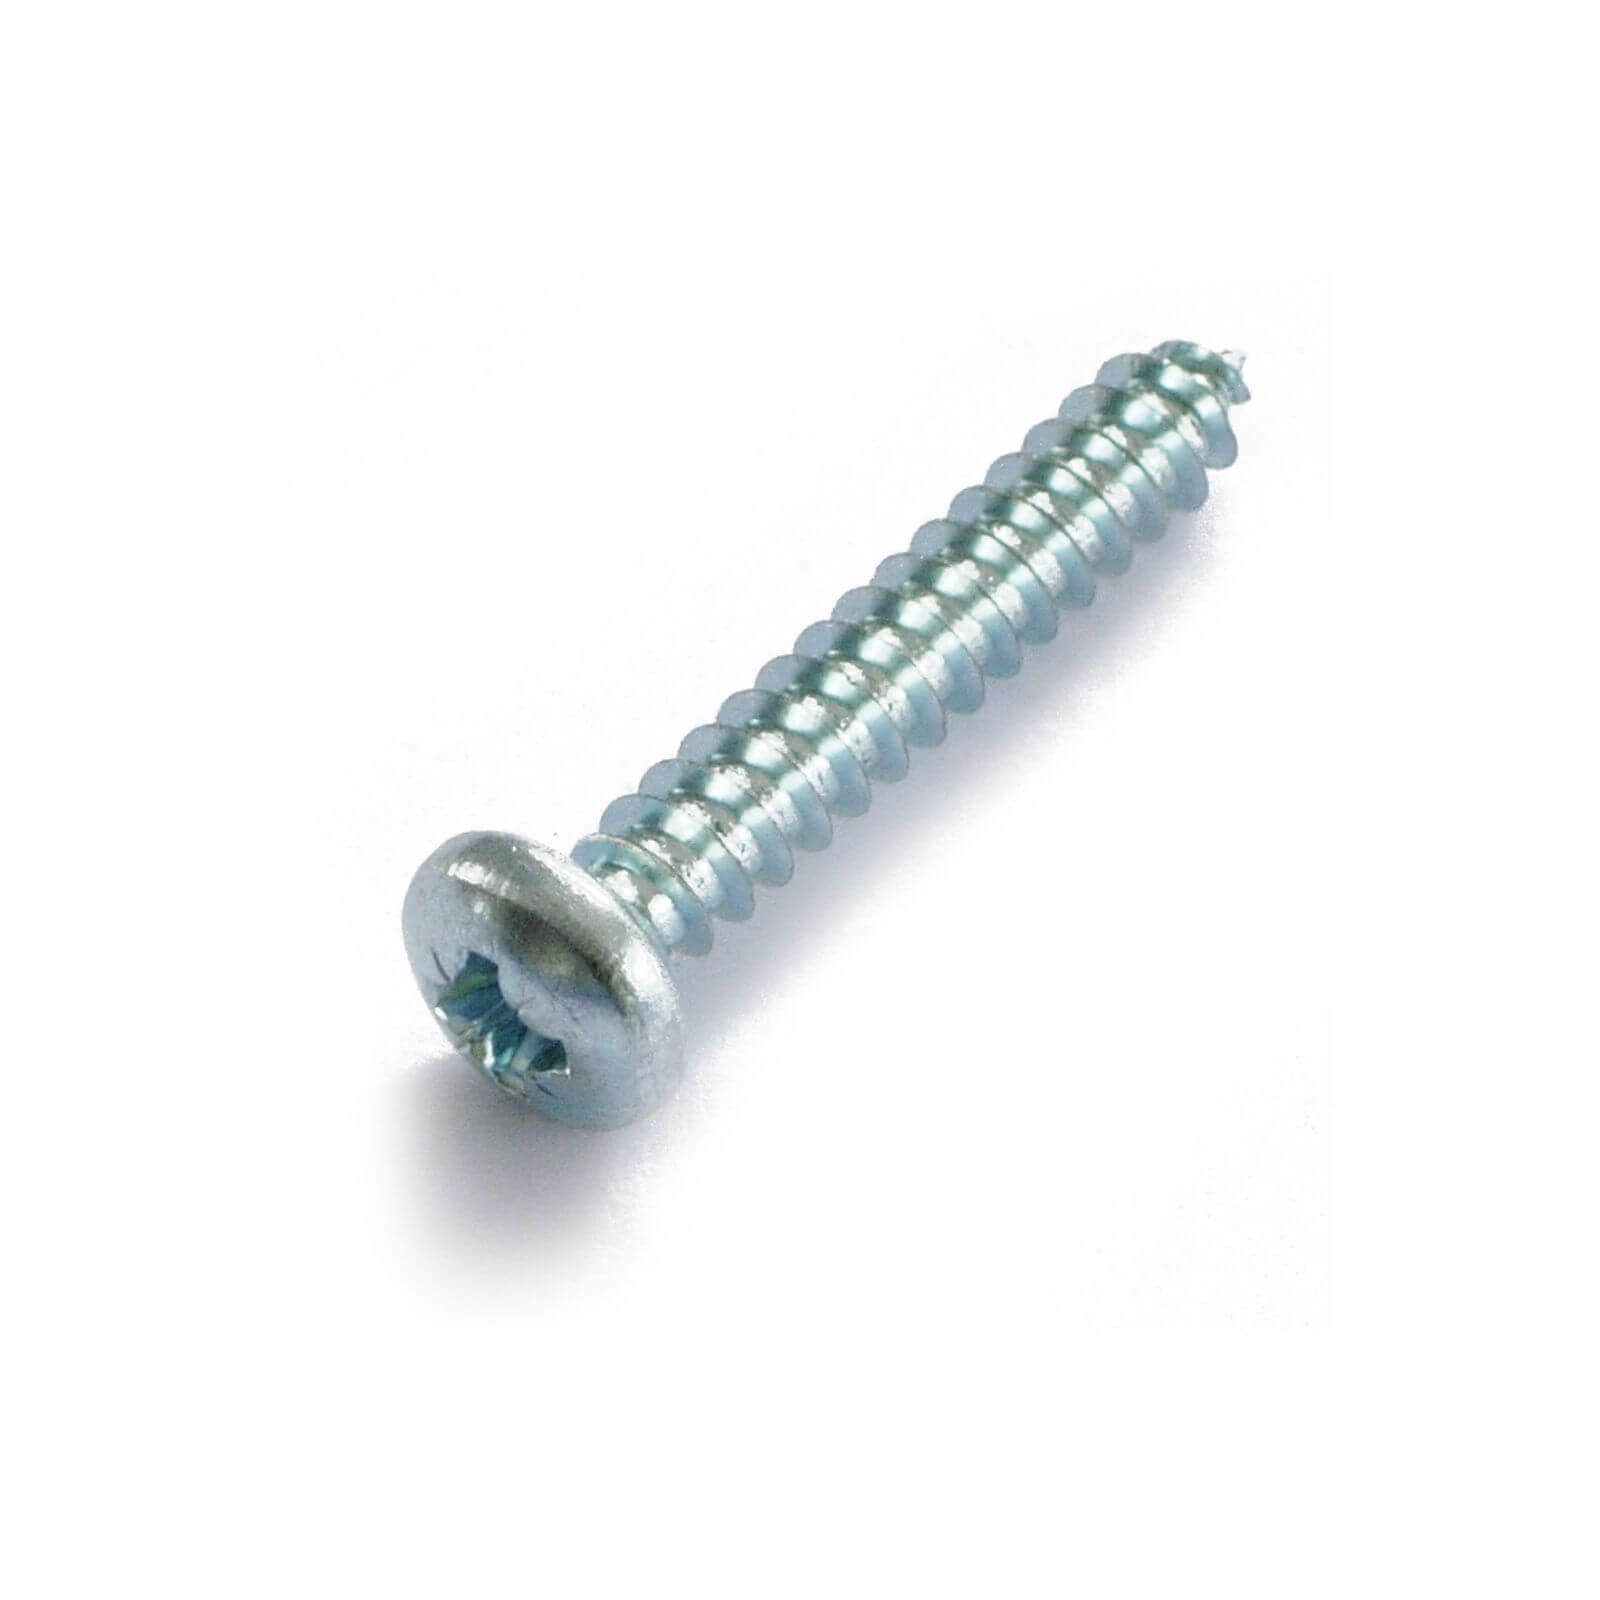 Self Tapping Screw - Bright Zinc Plated - 6 x 40mm - 10 Pack